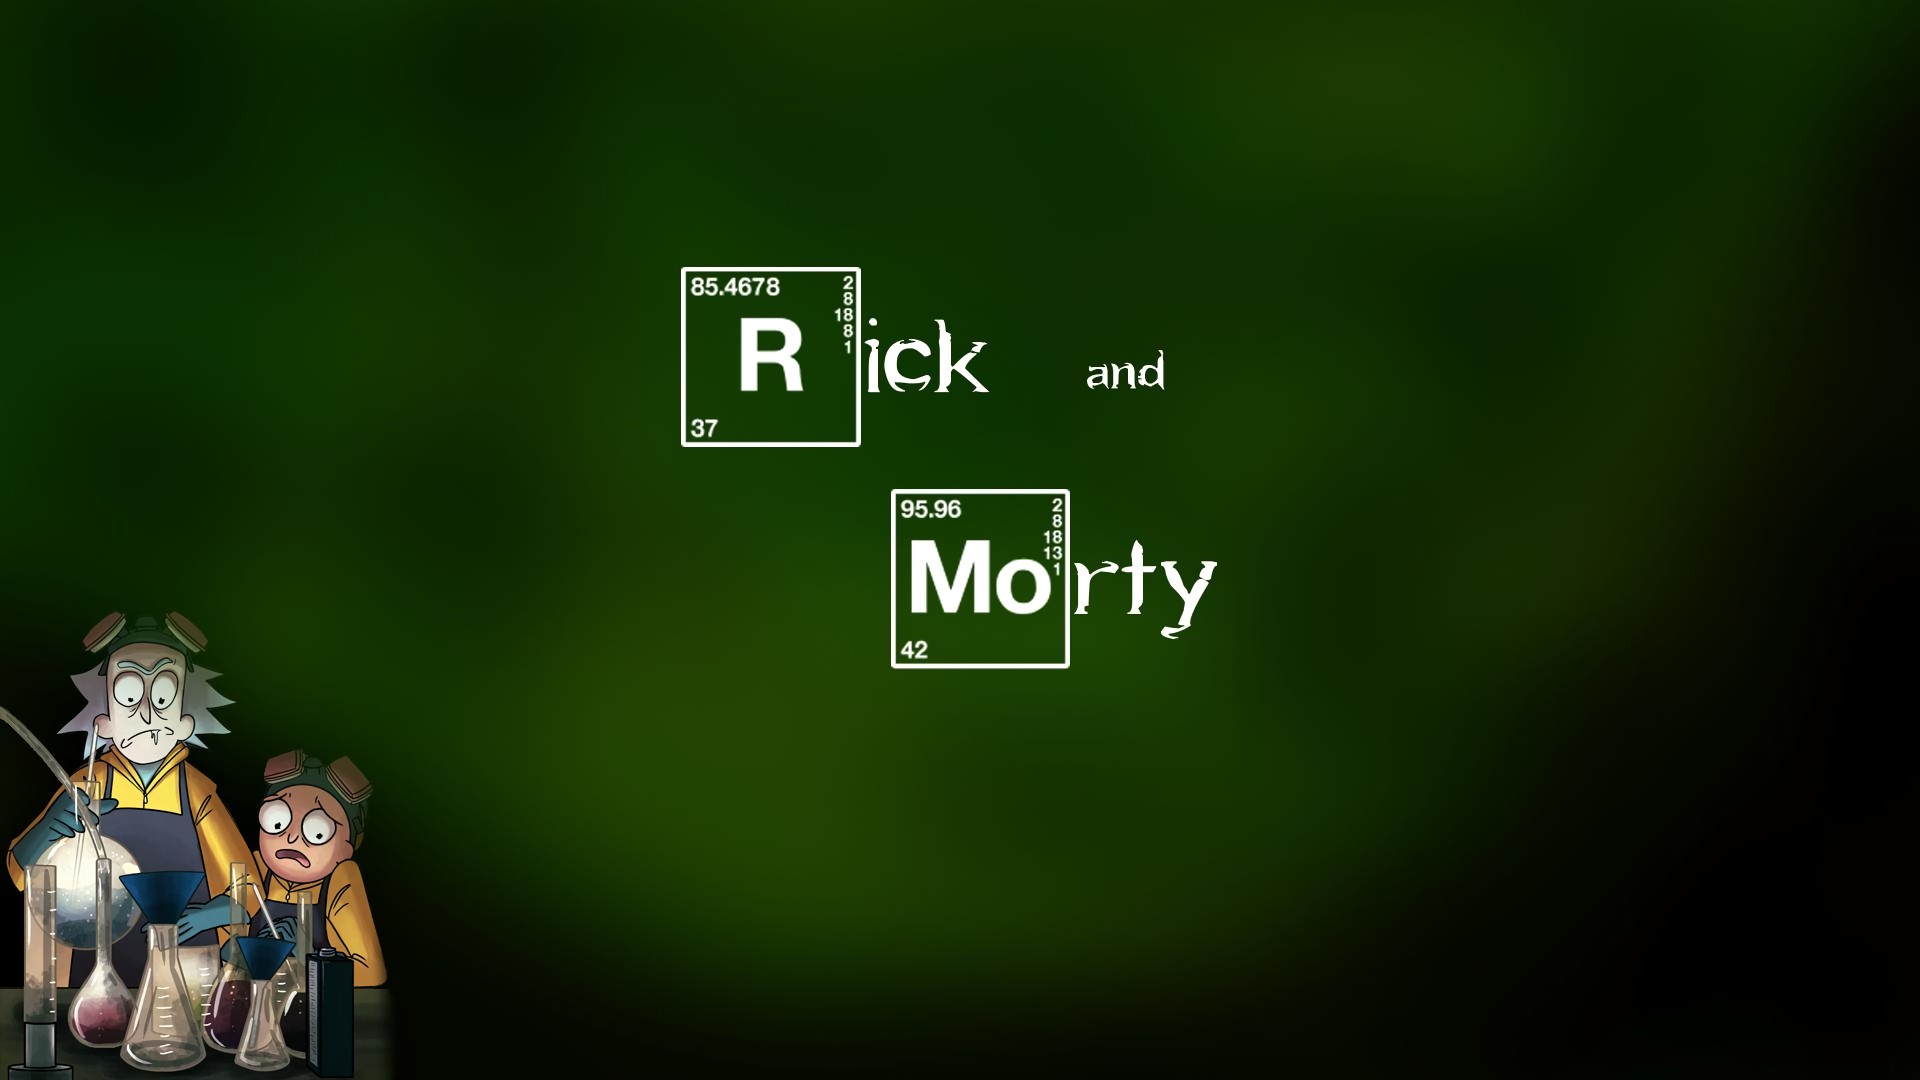 Wallpaper Rick n Morty Desktop with resolution 1920X1080 pixel. You can use this wallpaper as background for your desktop Computer Screensavers, Android or iPhone smartphones